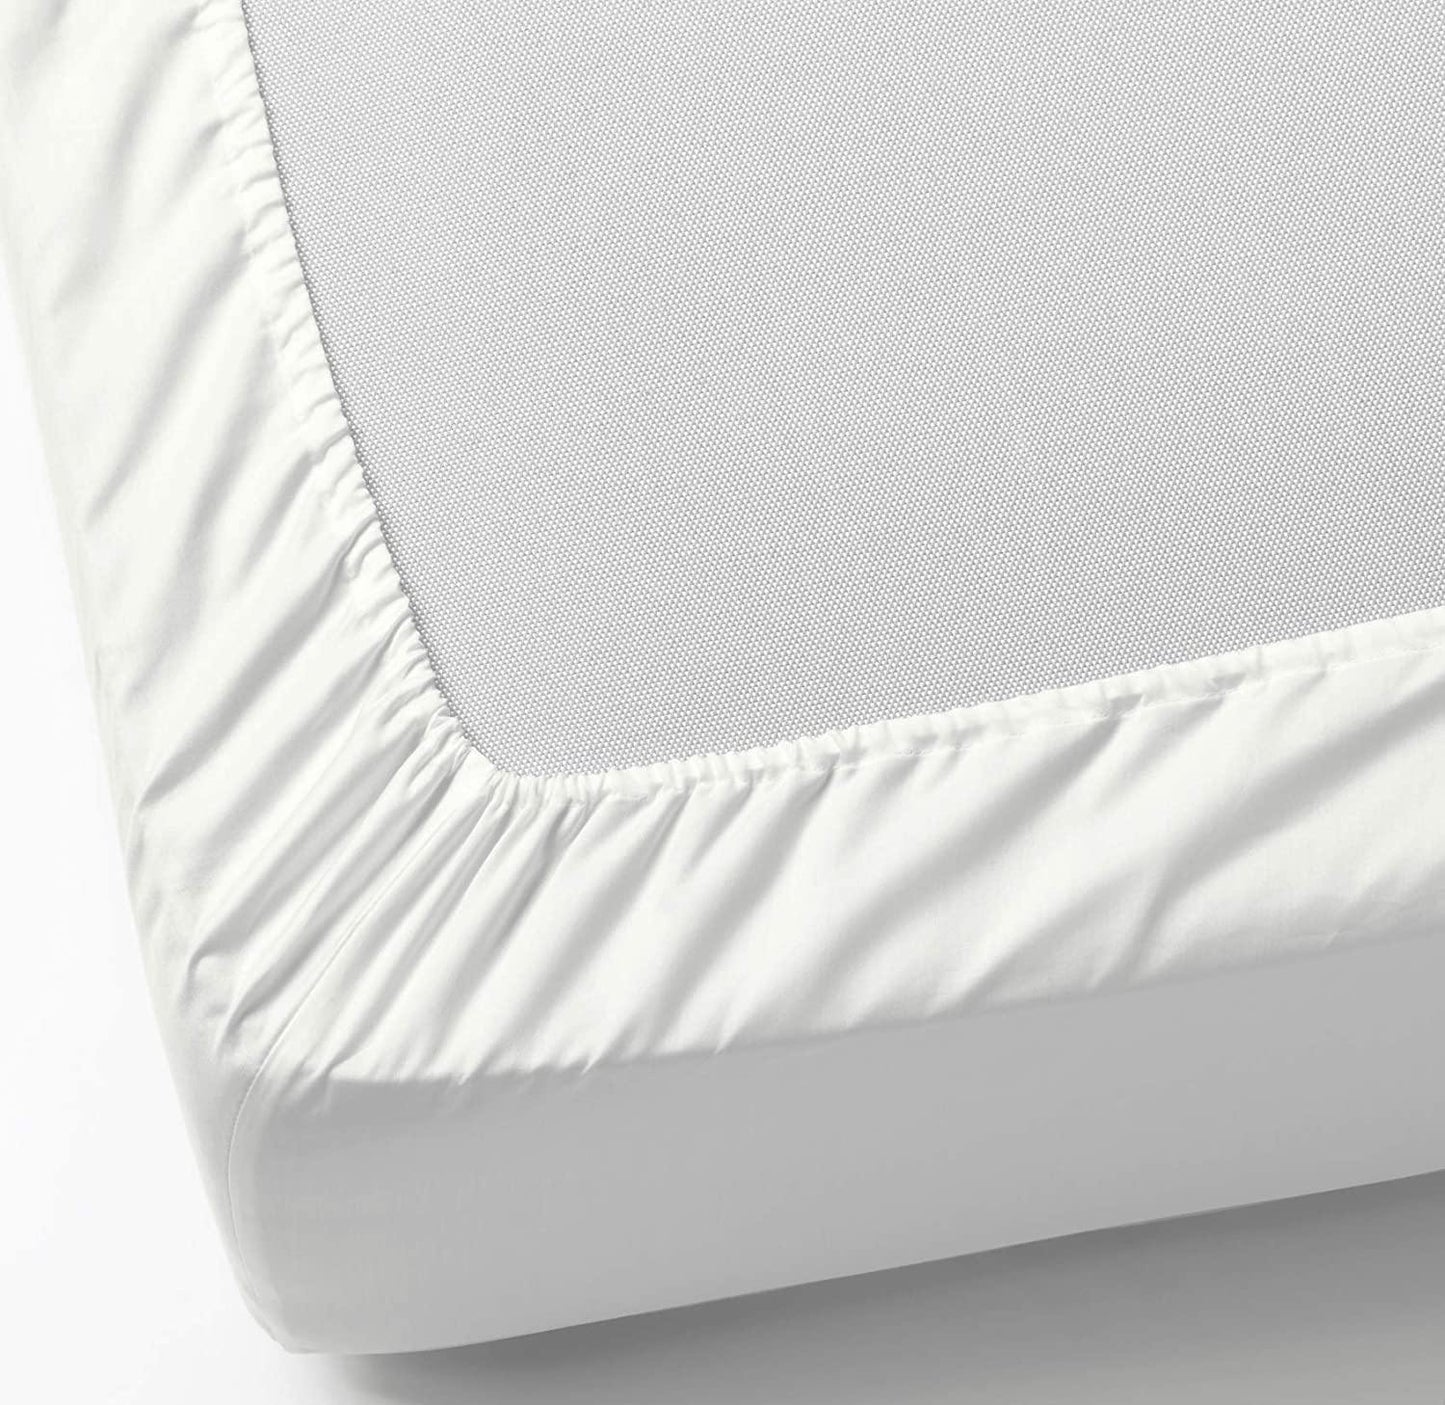 Quilted Water Proof Mattress Cover White